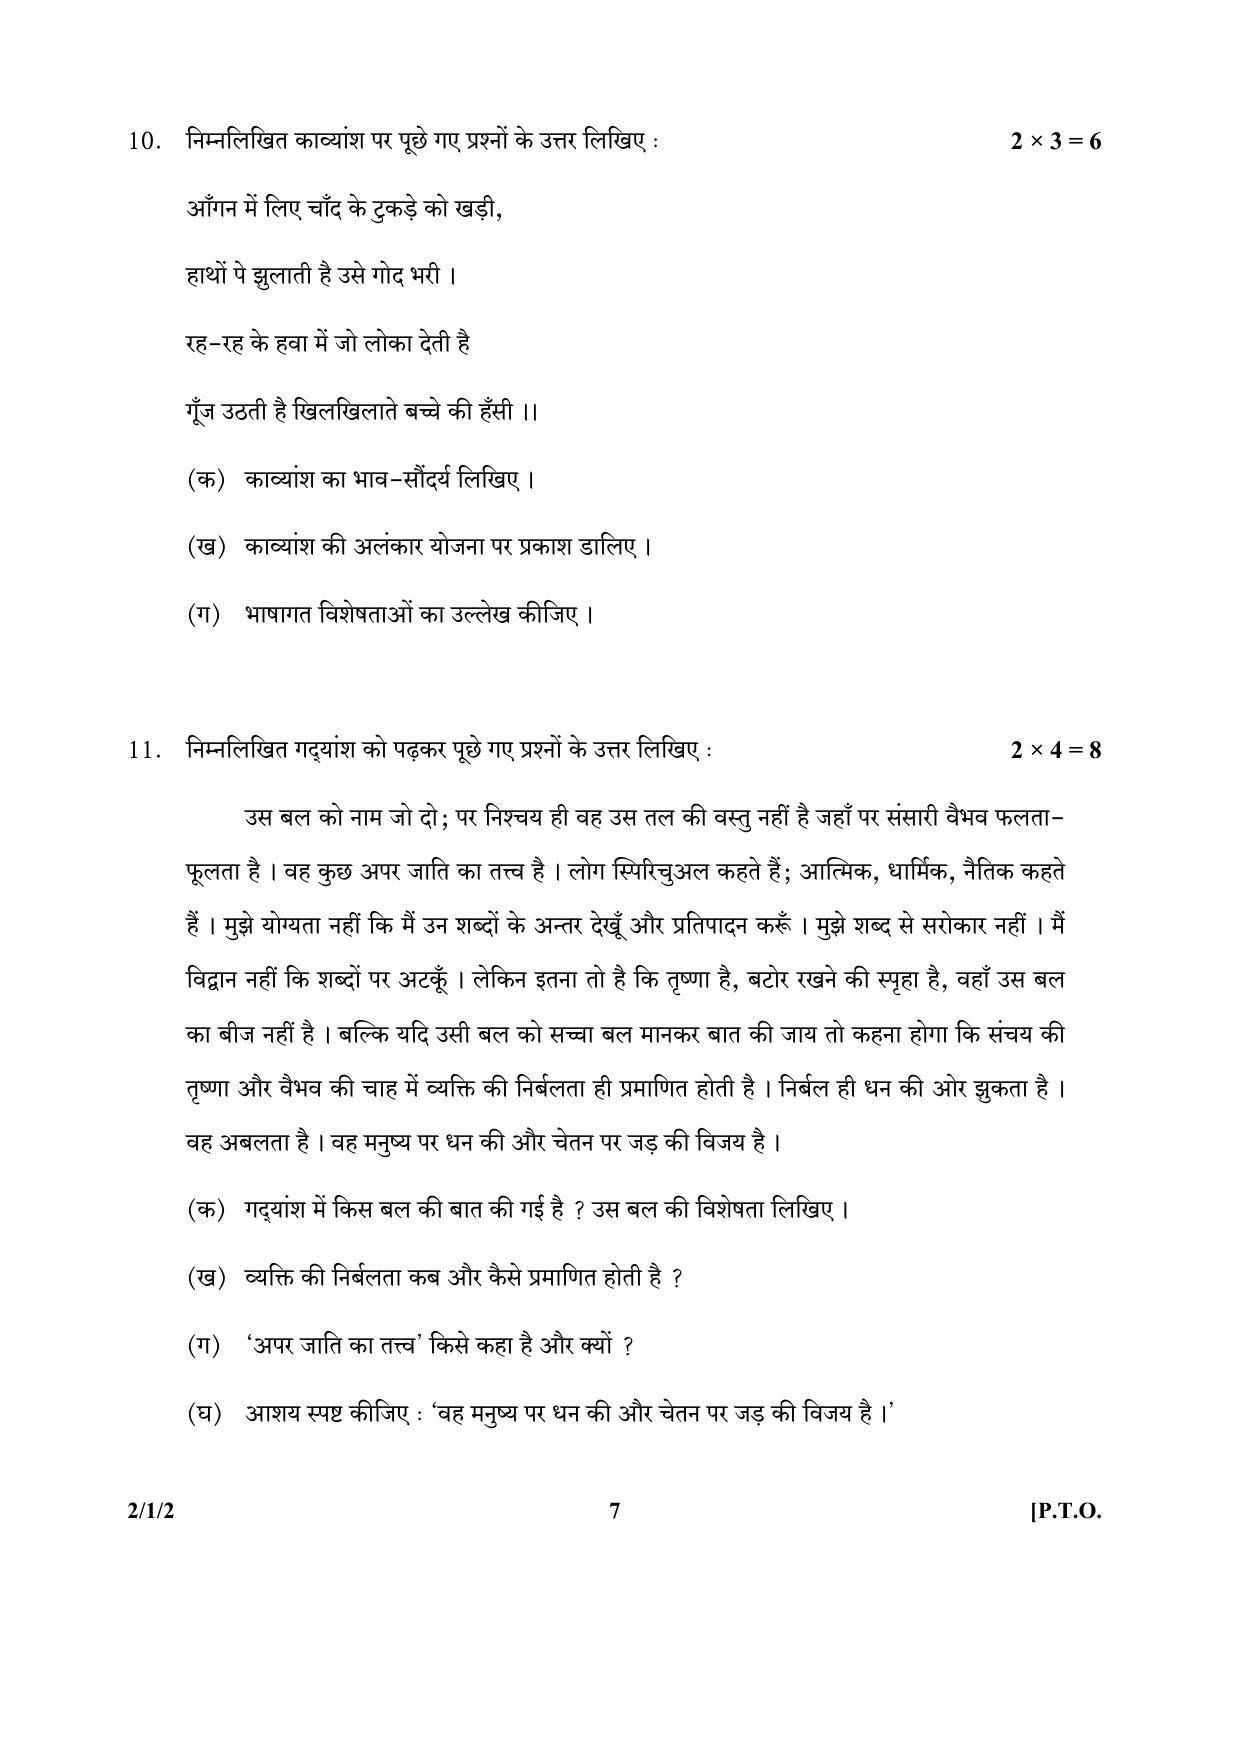 CBSE Class 12 2-1-2 (Hindi) 2017-comptt Question Paper - Page 7